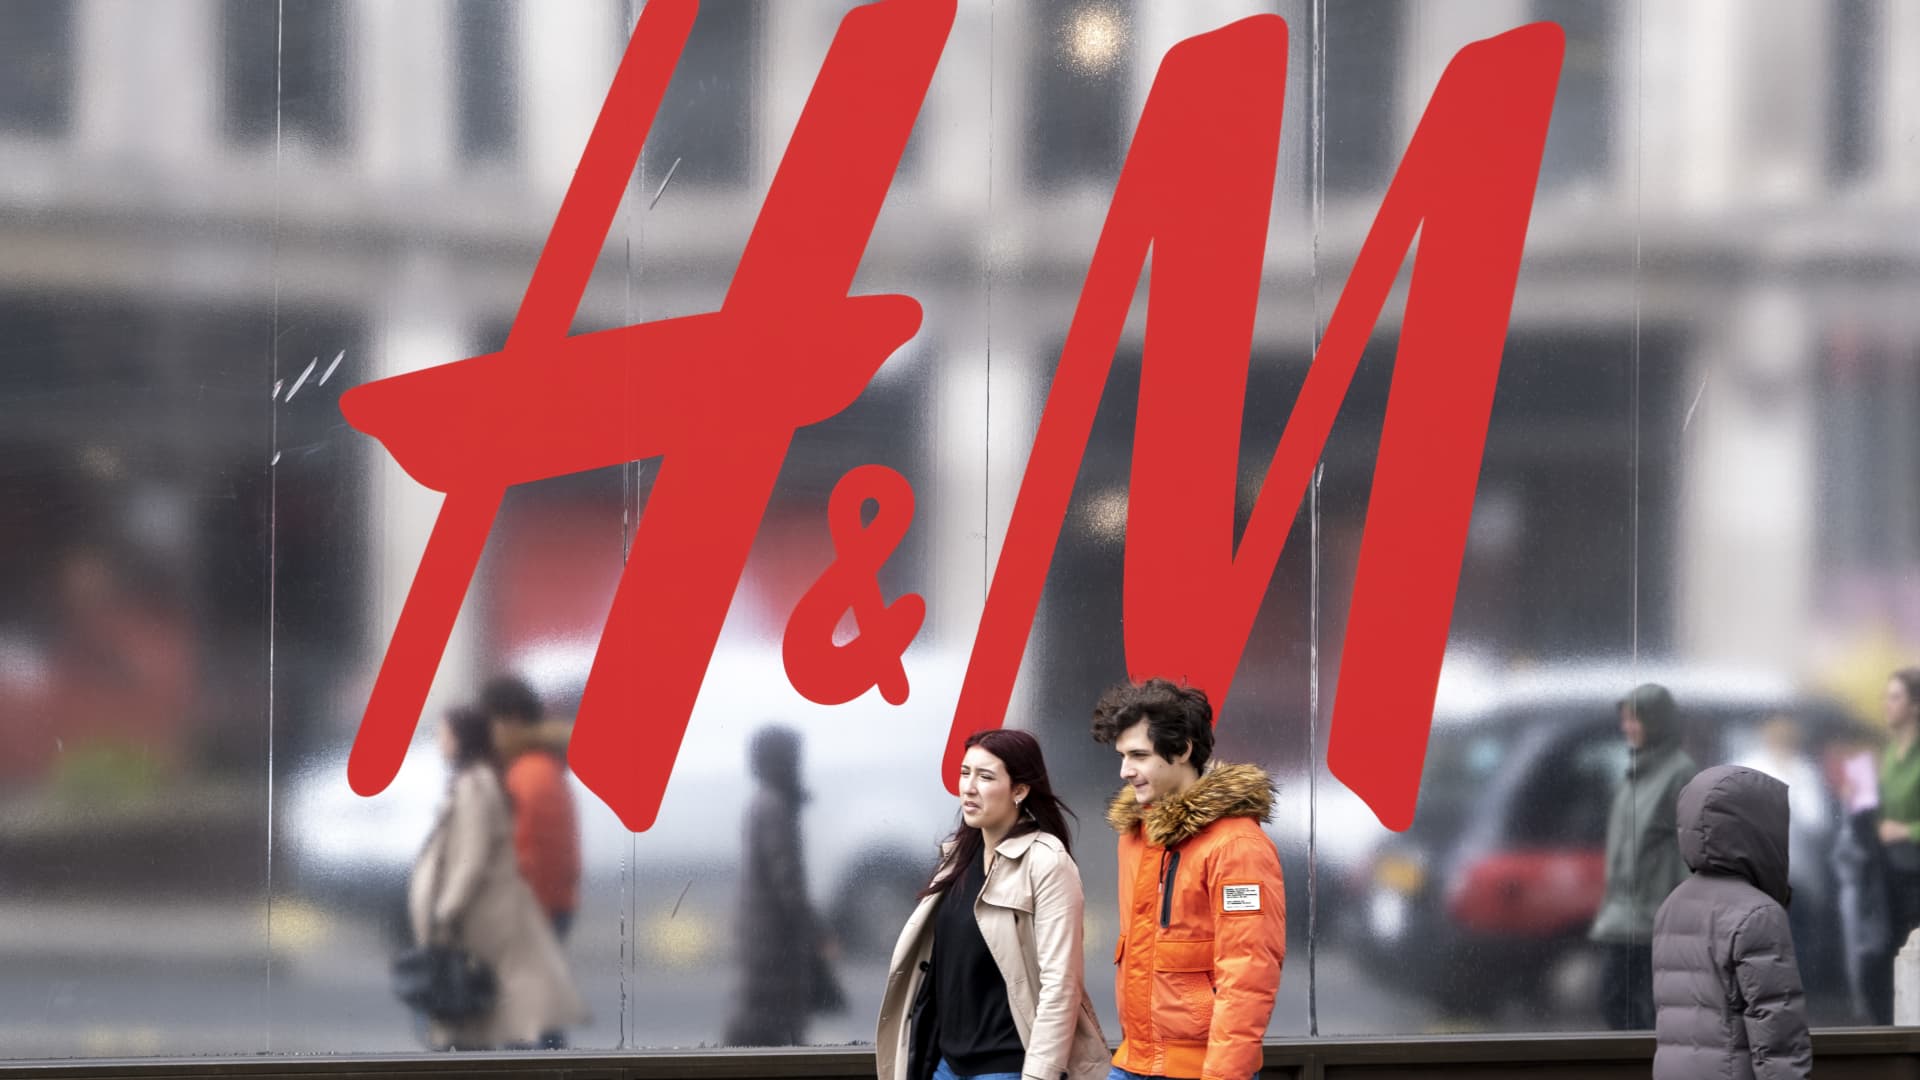 H&M shares tumble 8% after weaker sales and surprise CEO exit